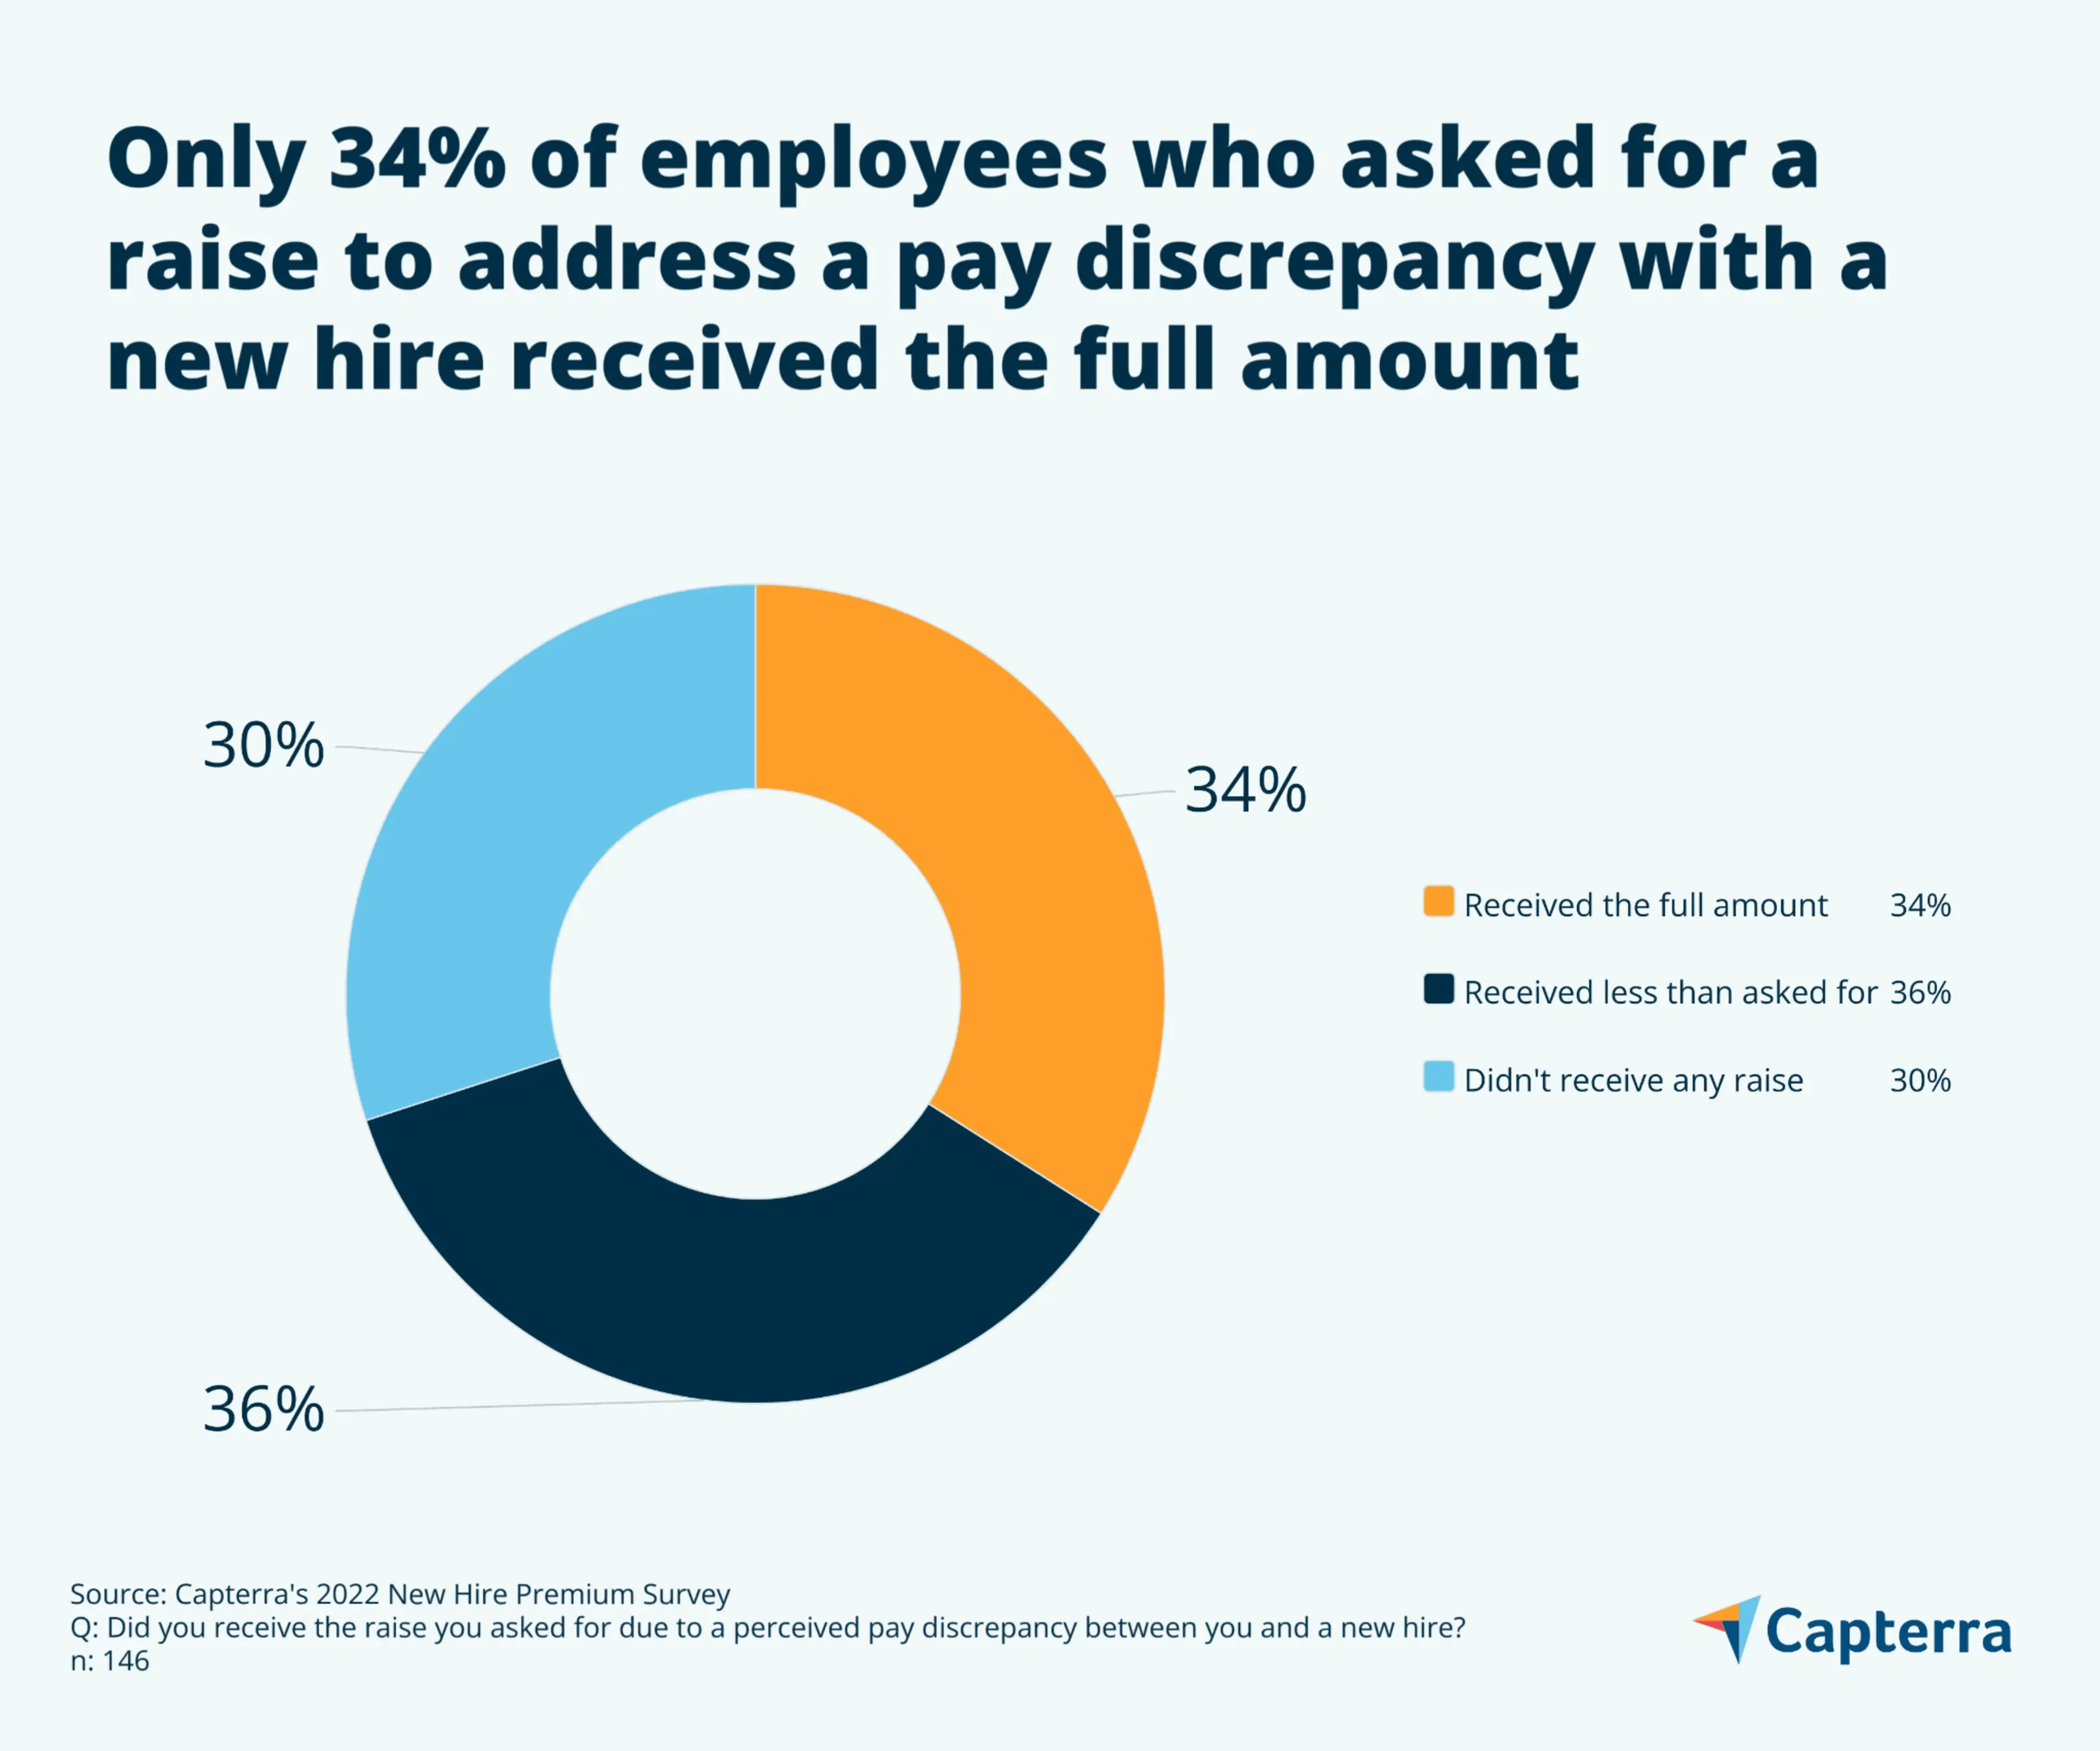 Pay inequality in the workplace: Only 34% of employees who asked for a raise due to pay discrepancy go the amount they asked for